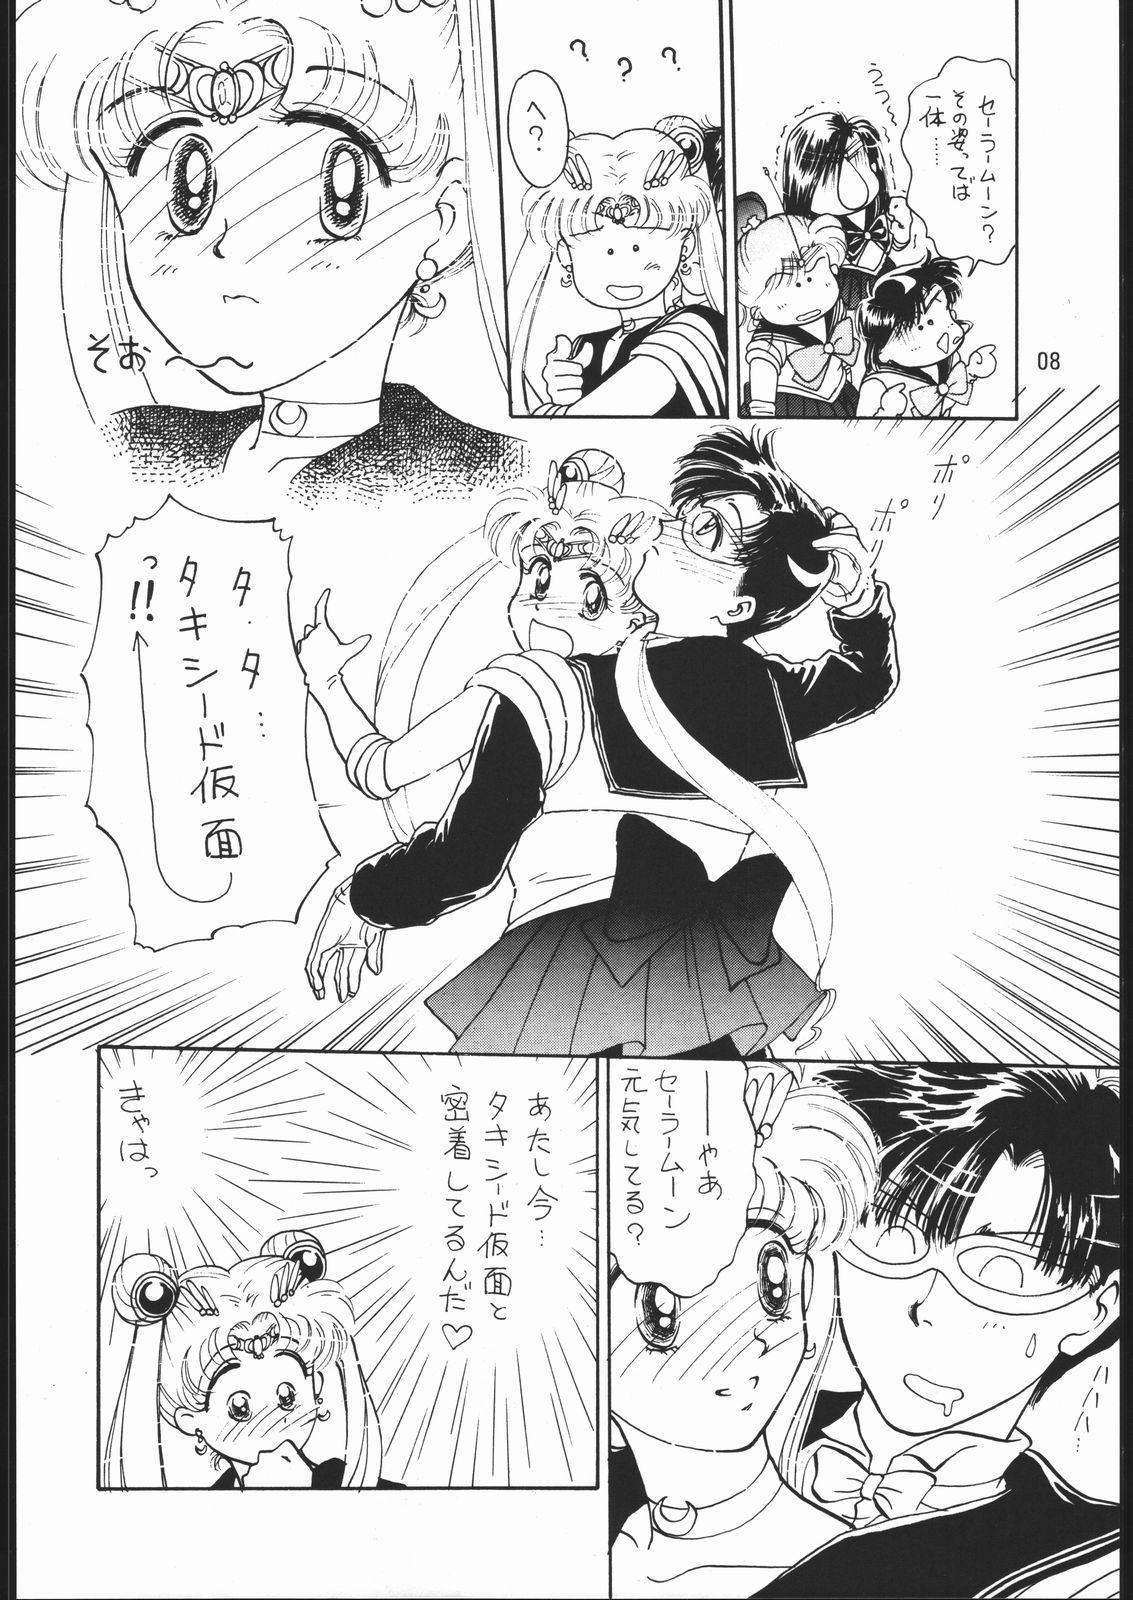 First Time うさぎがピョン!! - Sailor moon Indonesian - Page 7